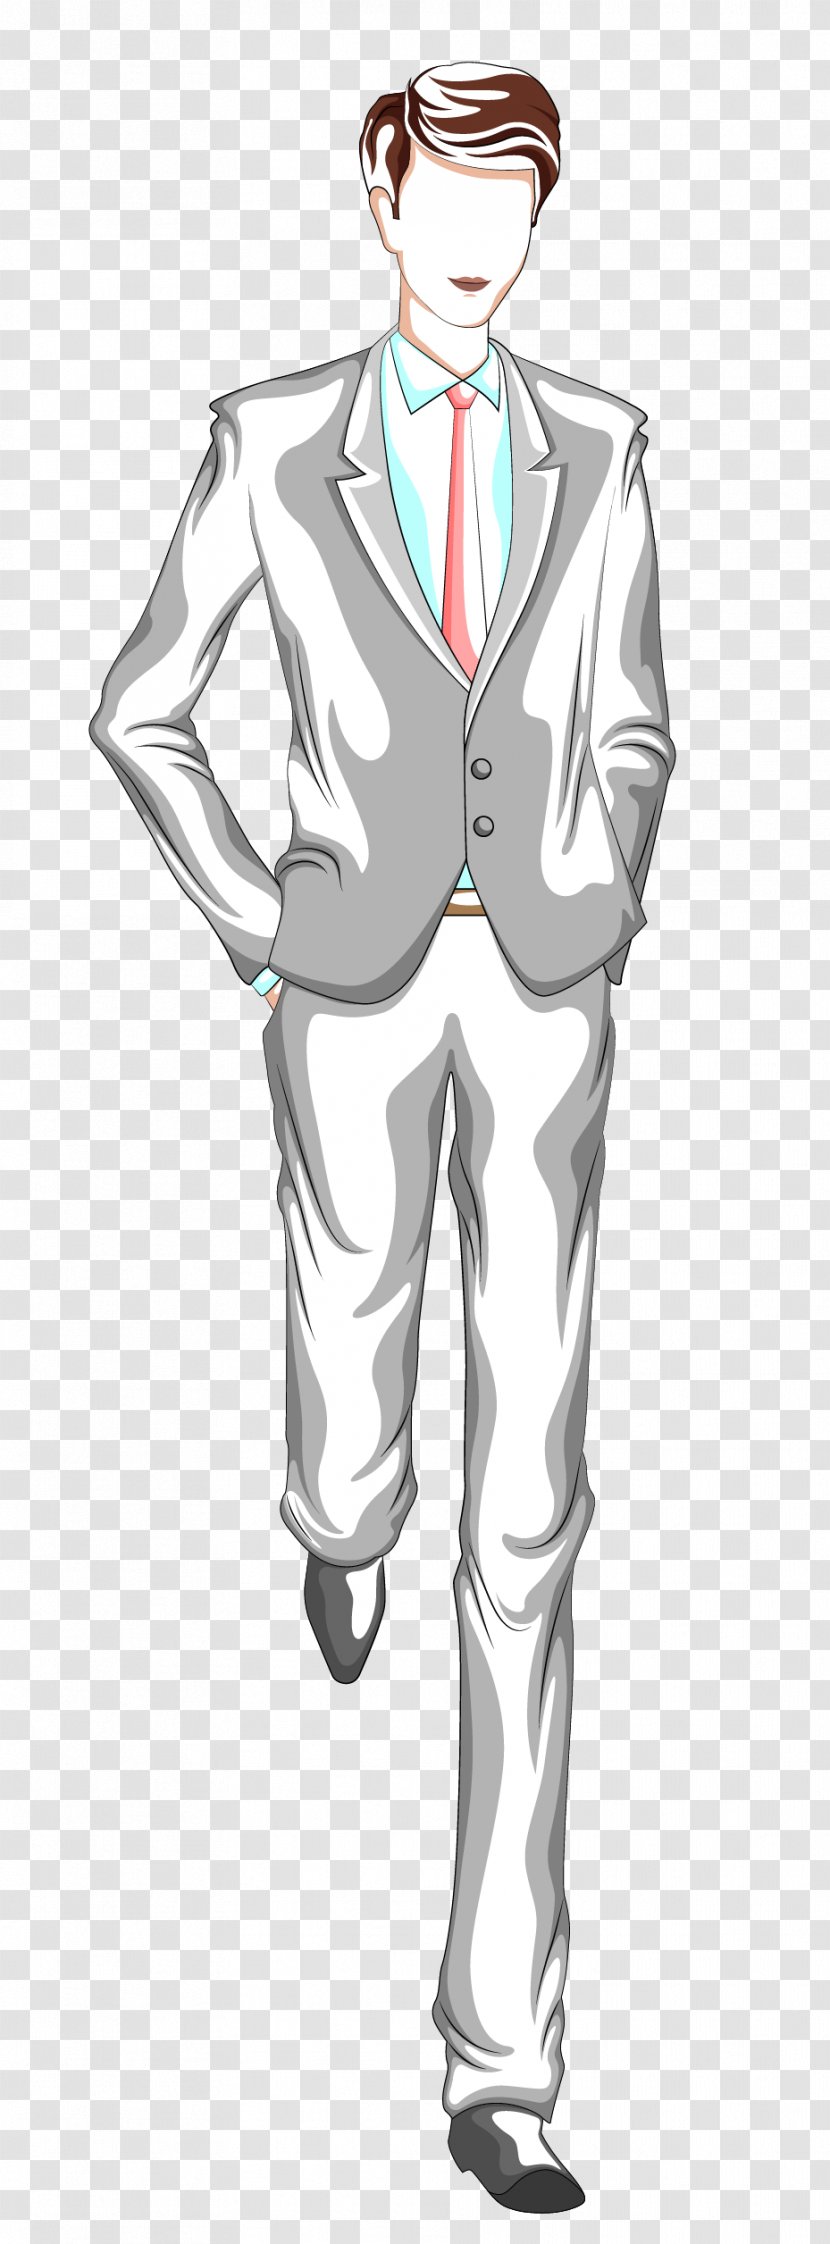 Wedding Marriage Illustration - Fictional Character - Handsome Man Transparent PNG